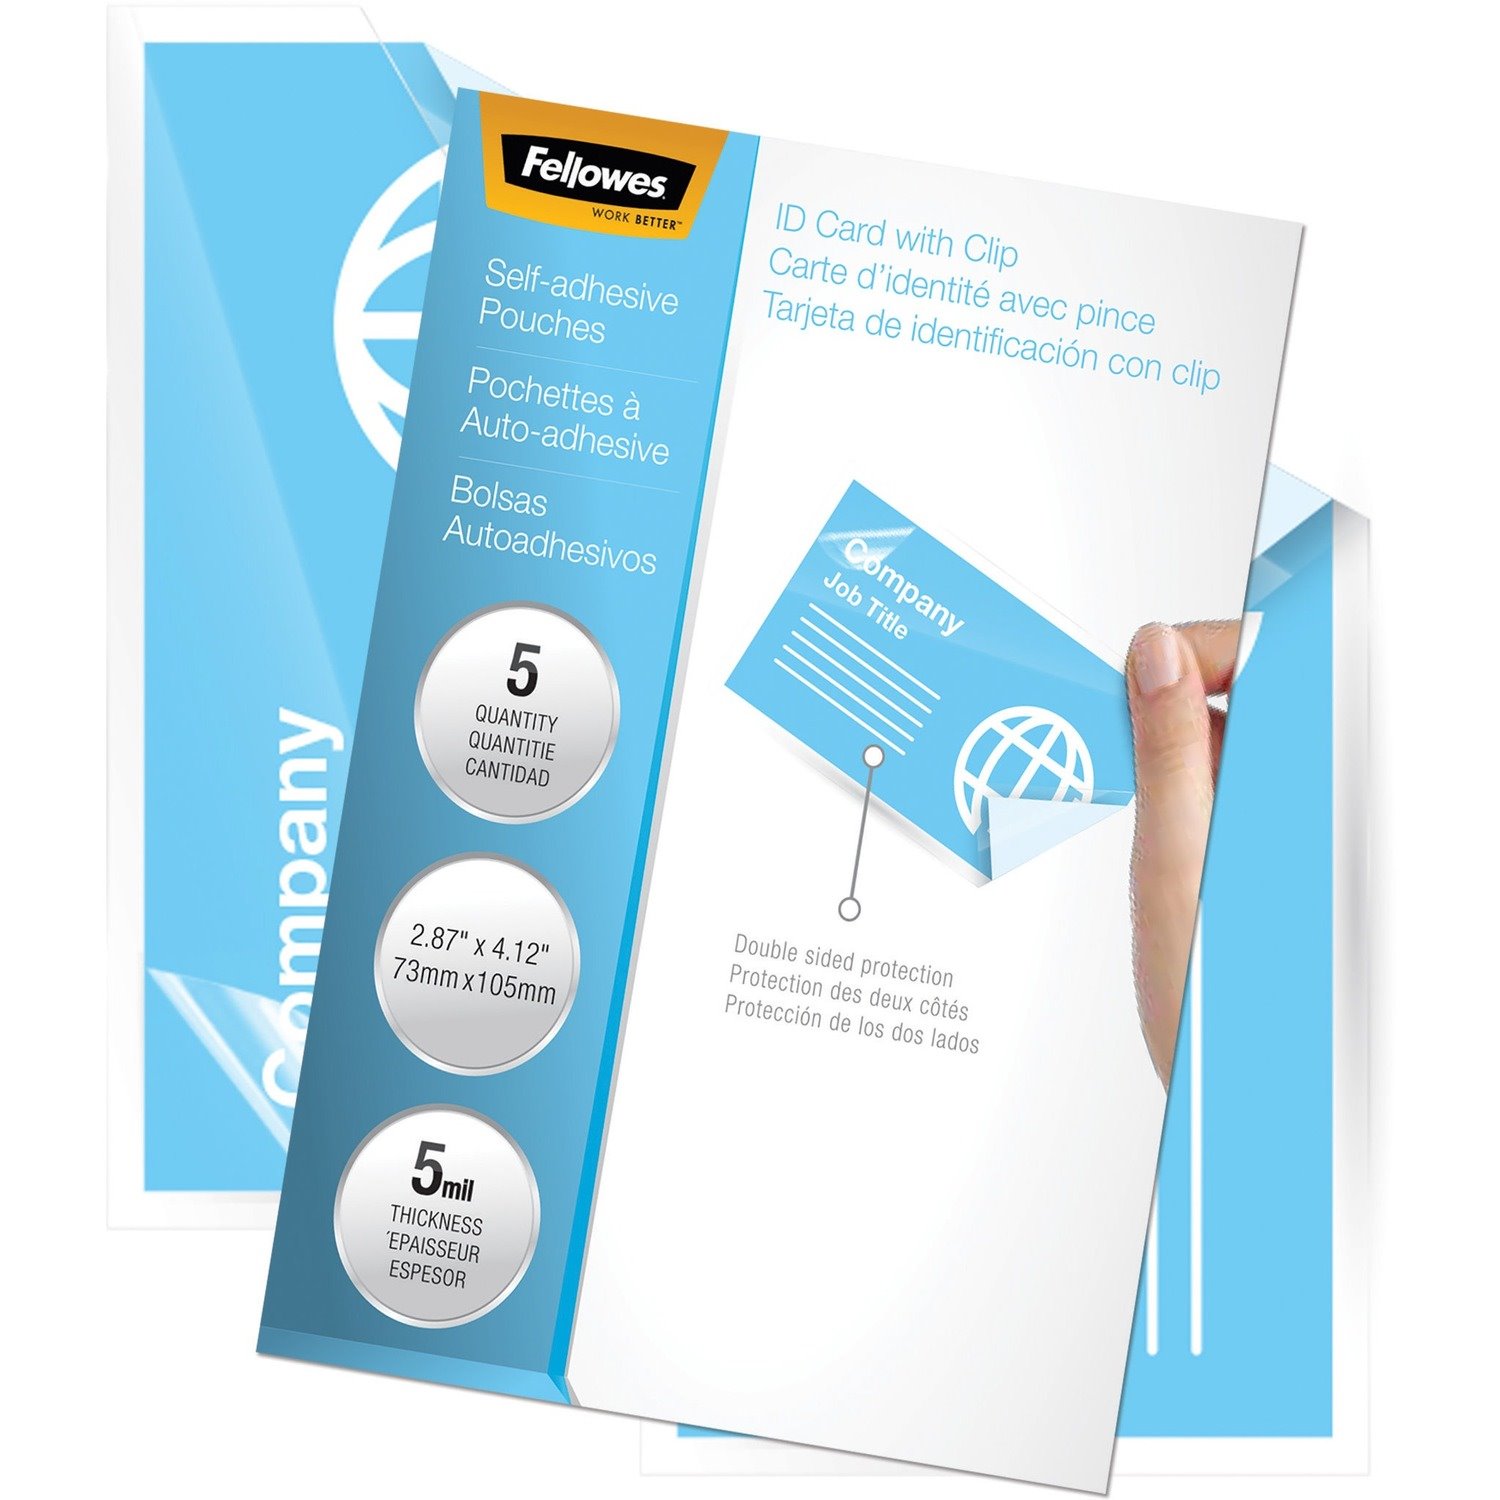 Fellowes Self-Adhesive Pouches - Business Card, 5mil, 5 pack